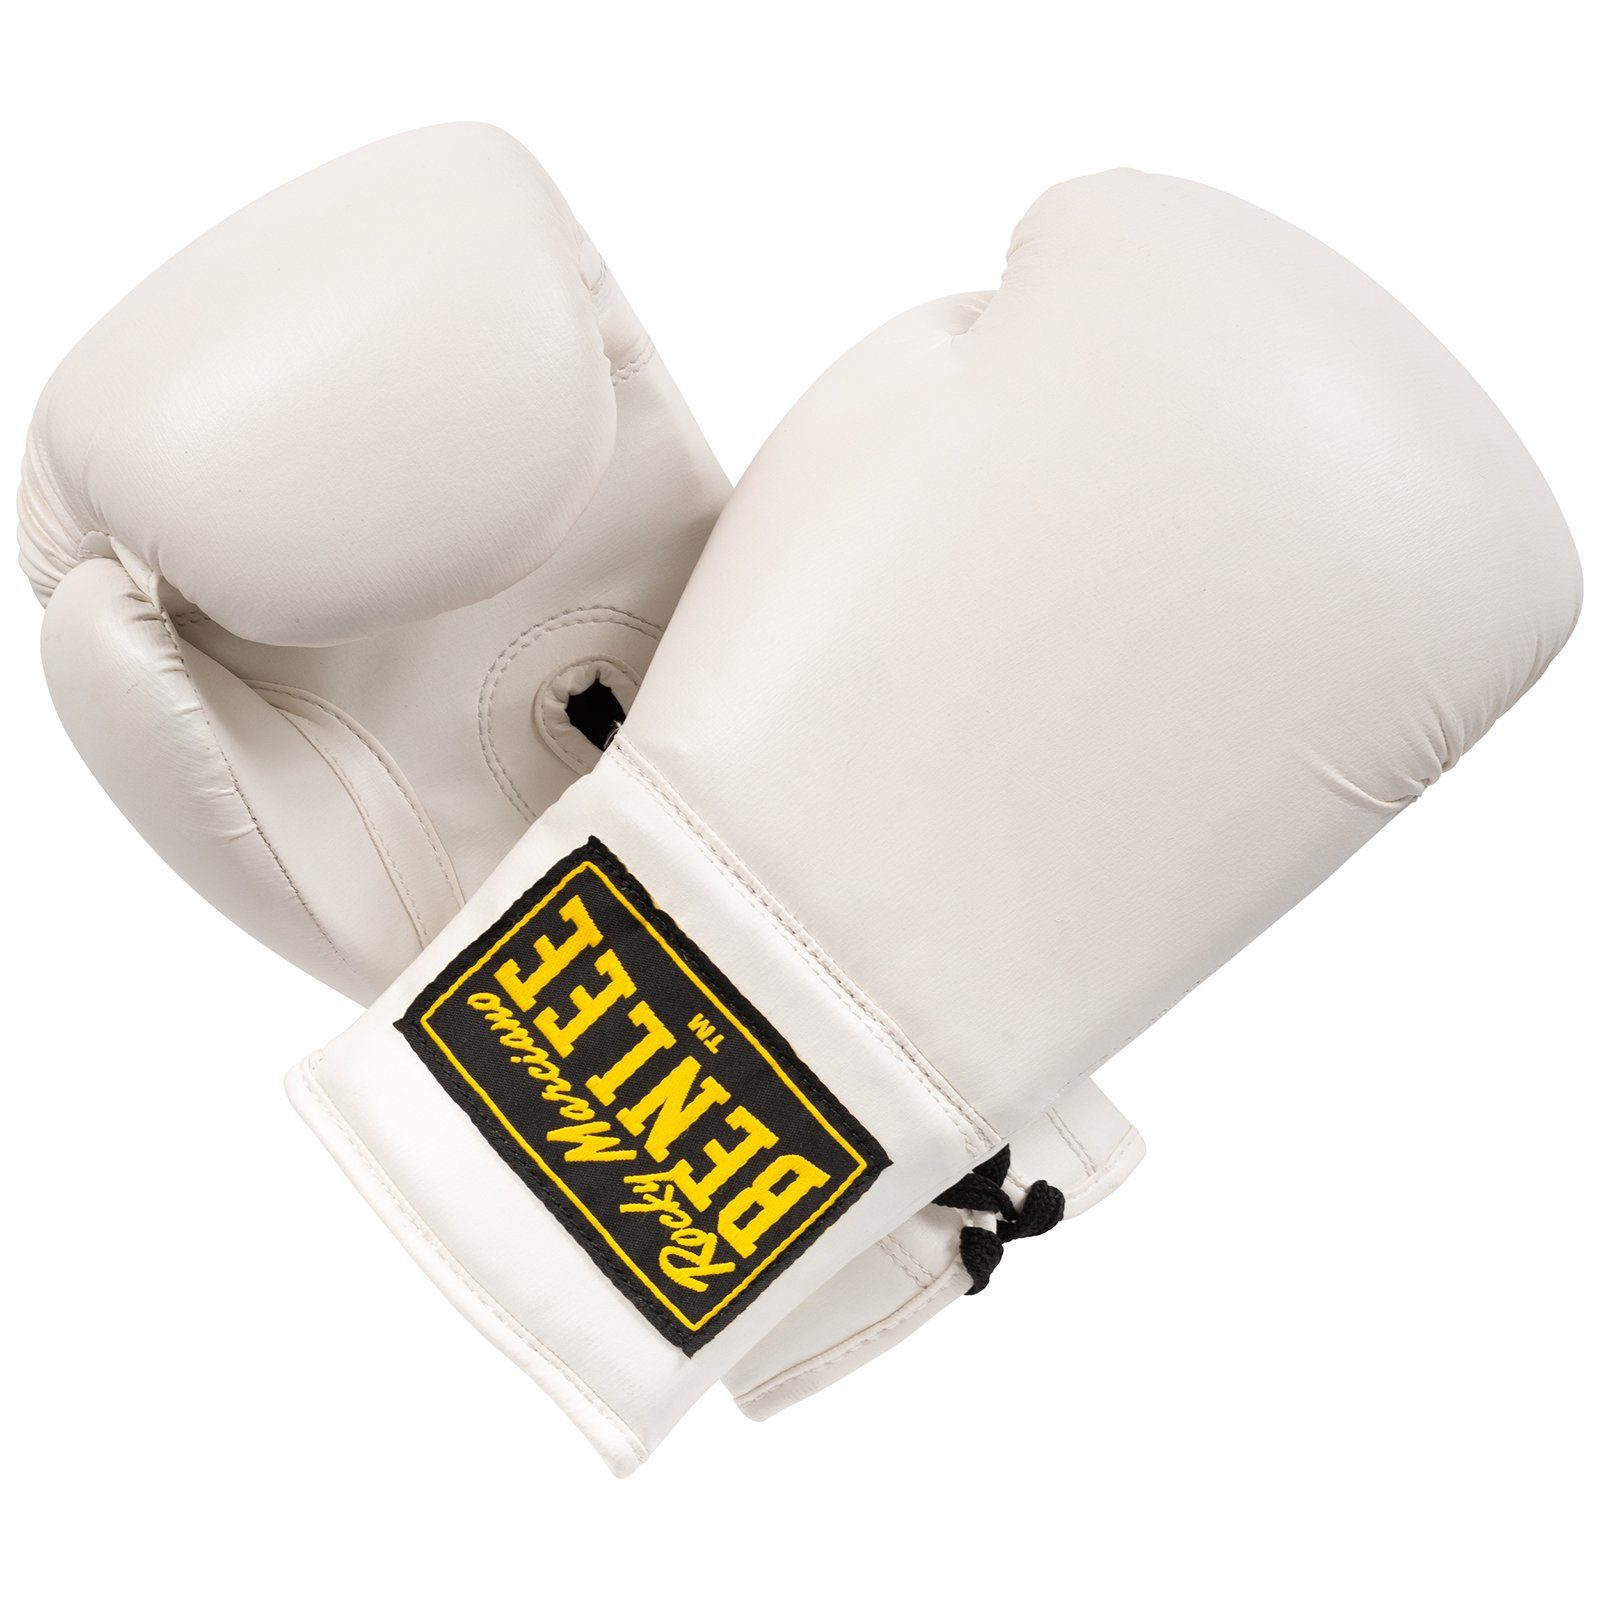 Benlee White Boxhandschuhe GLOVES Marciano Rocky AUTOGRAPH